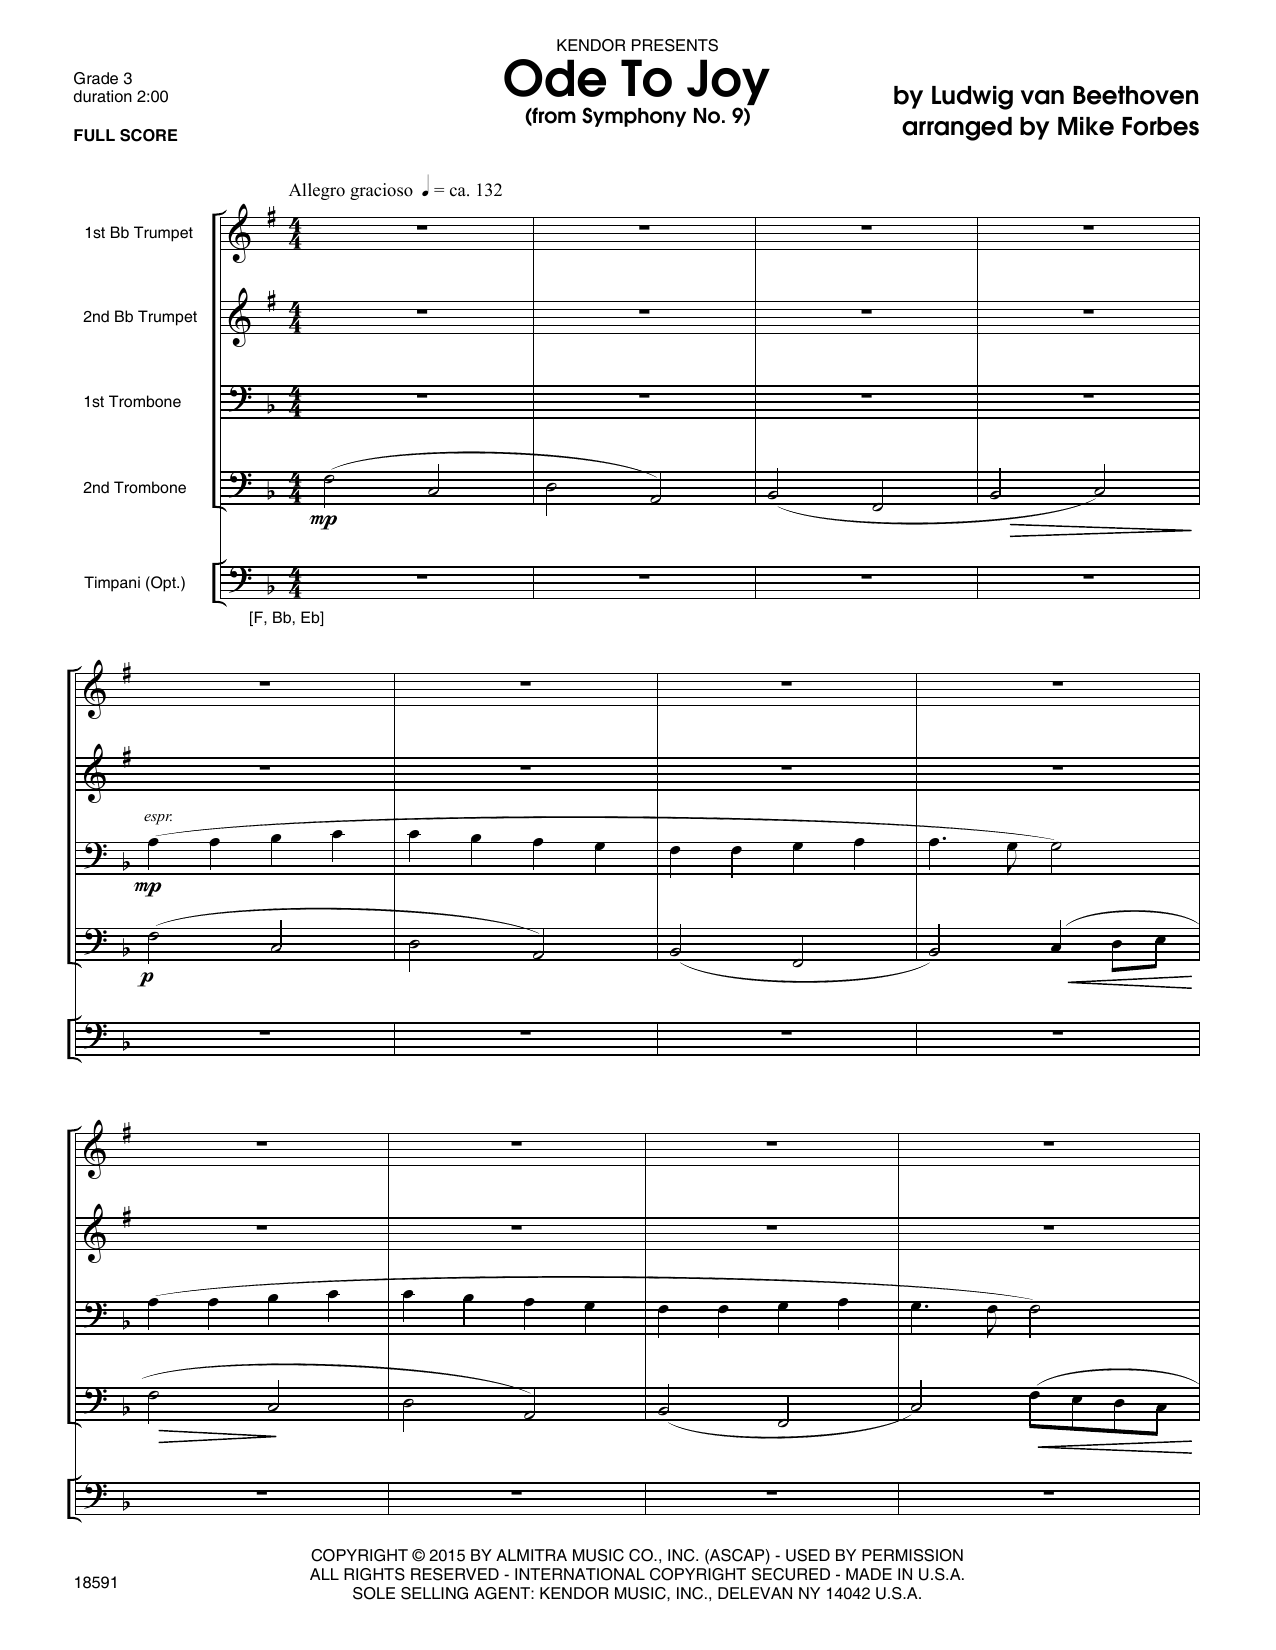 Download Mike Forbes Ode To Joy (from Symphony No. 9) - Full Sheet Music